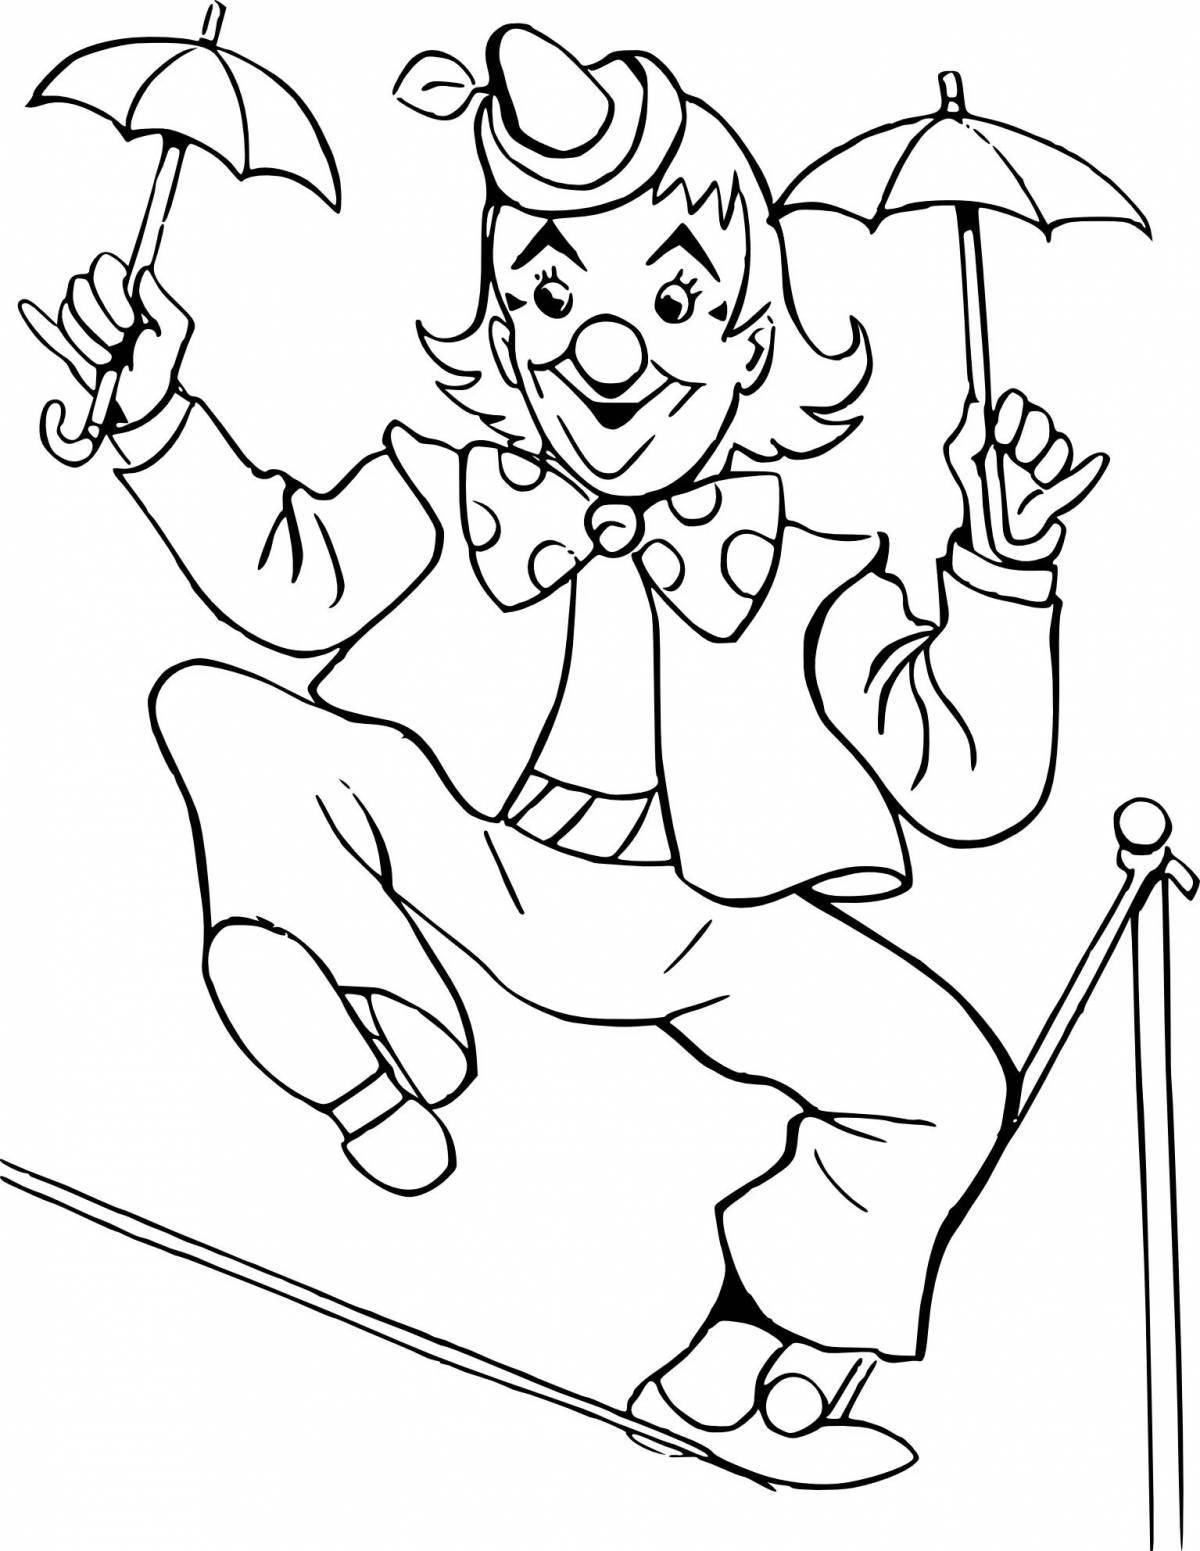 Exciting circus coloring book for kids